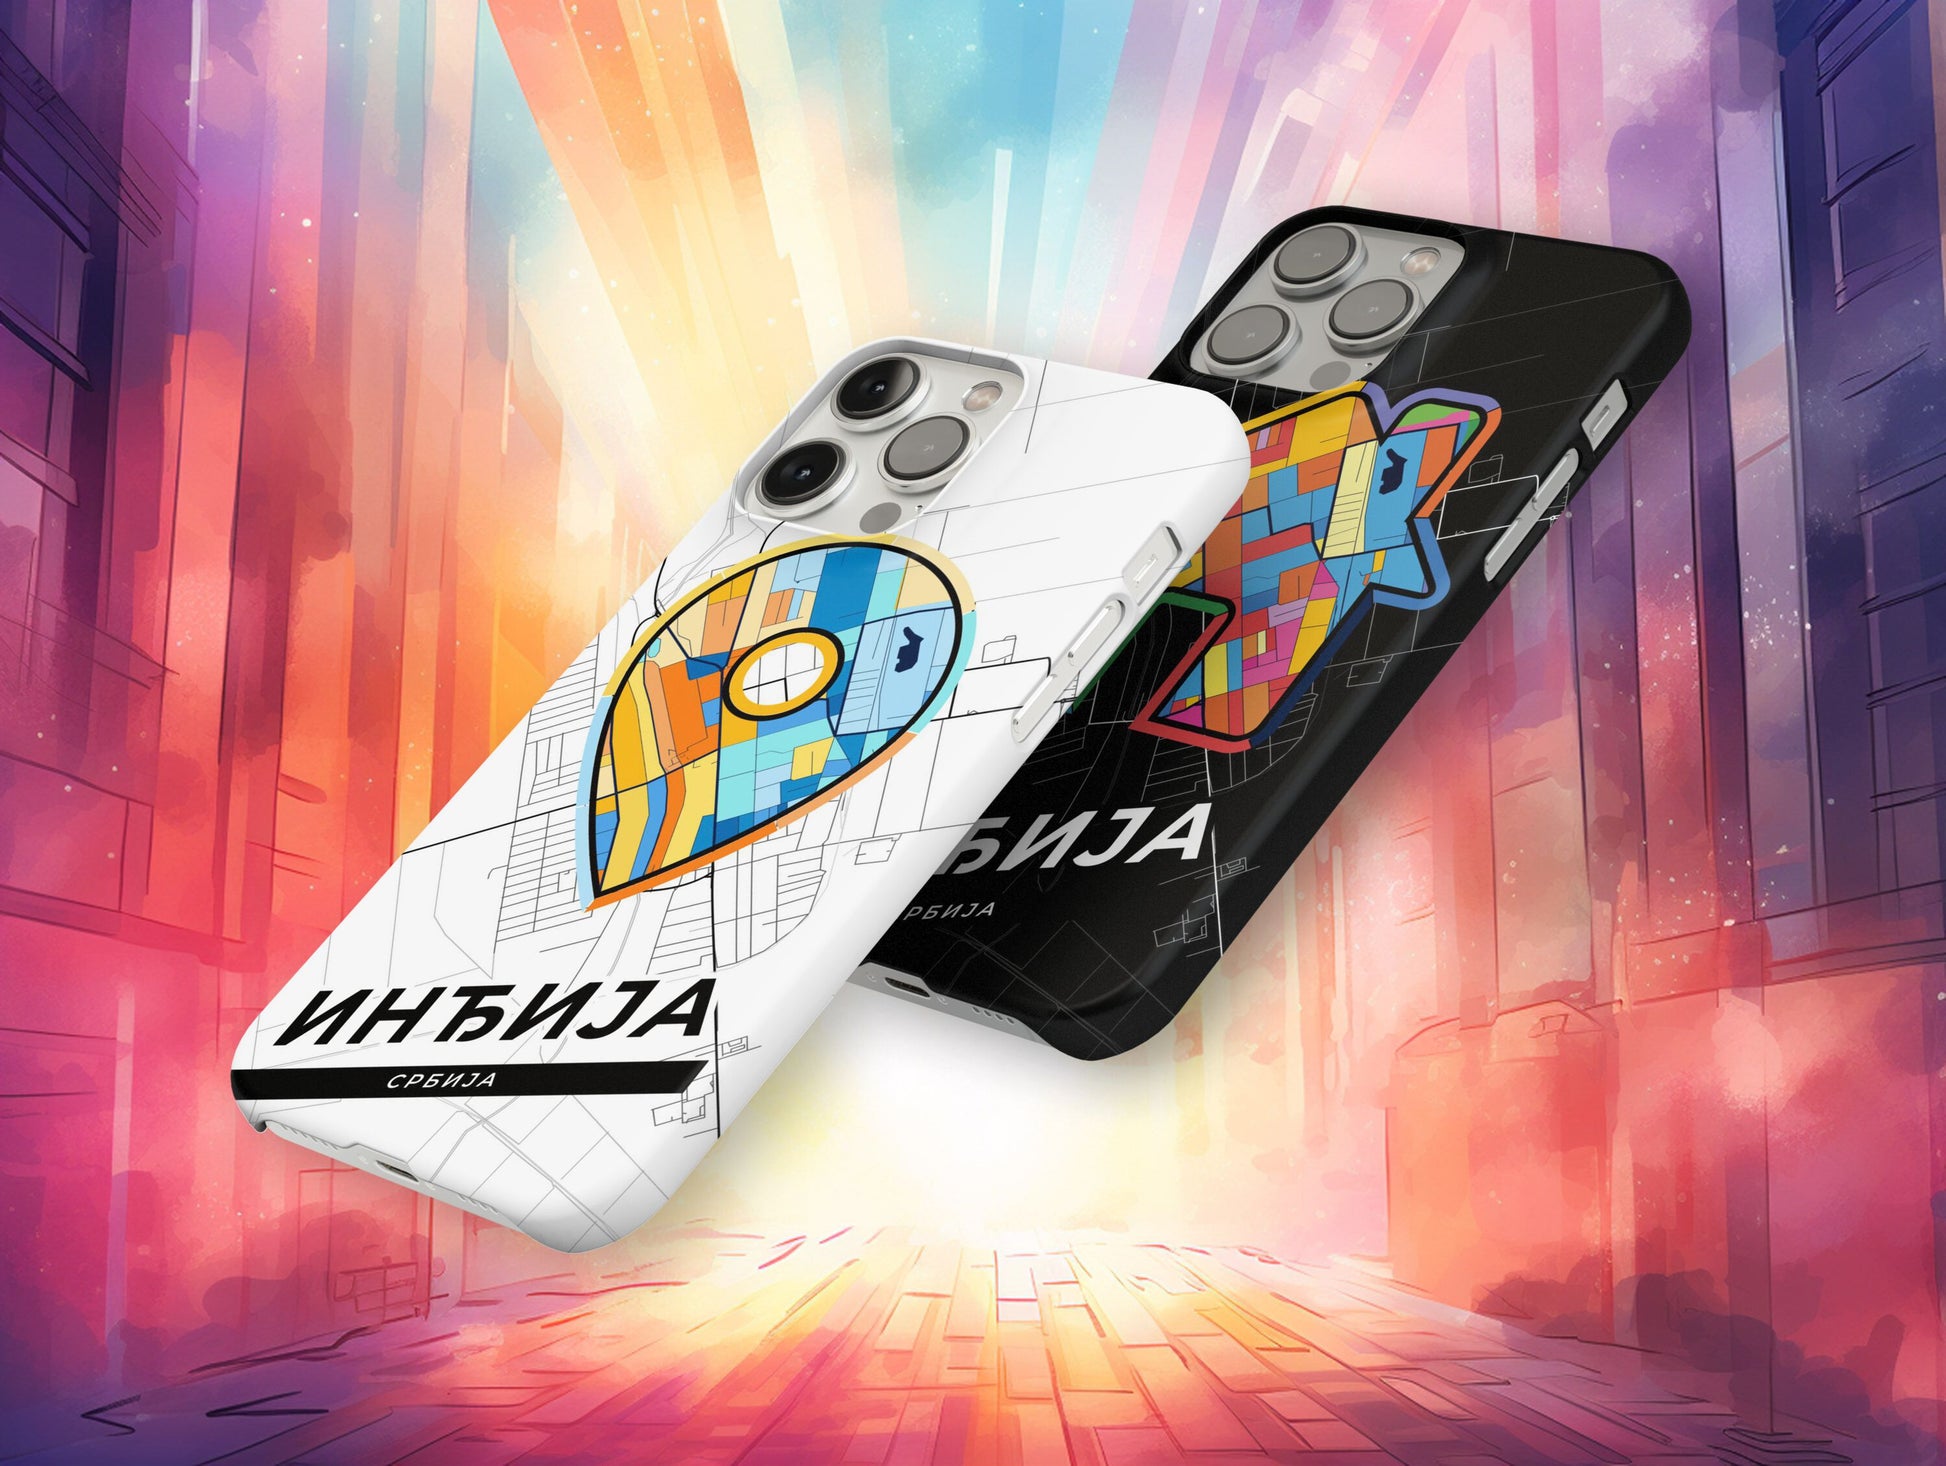 Inđija Serbia slim phone case with colorful icon. Birthday, wedding or housewarming gift. Couple match cases.